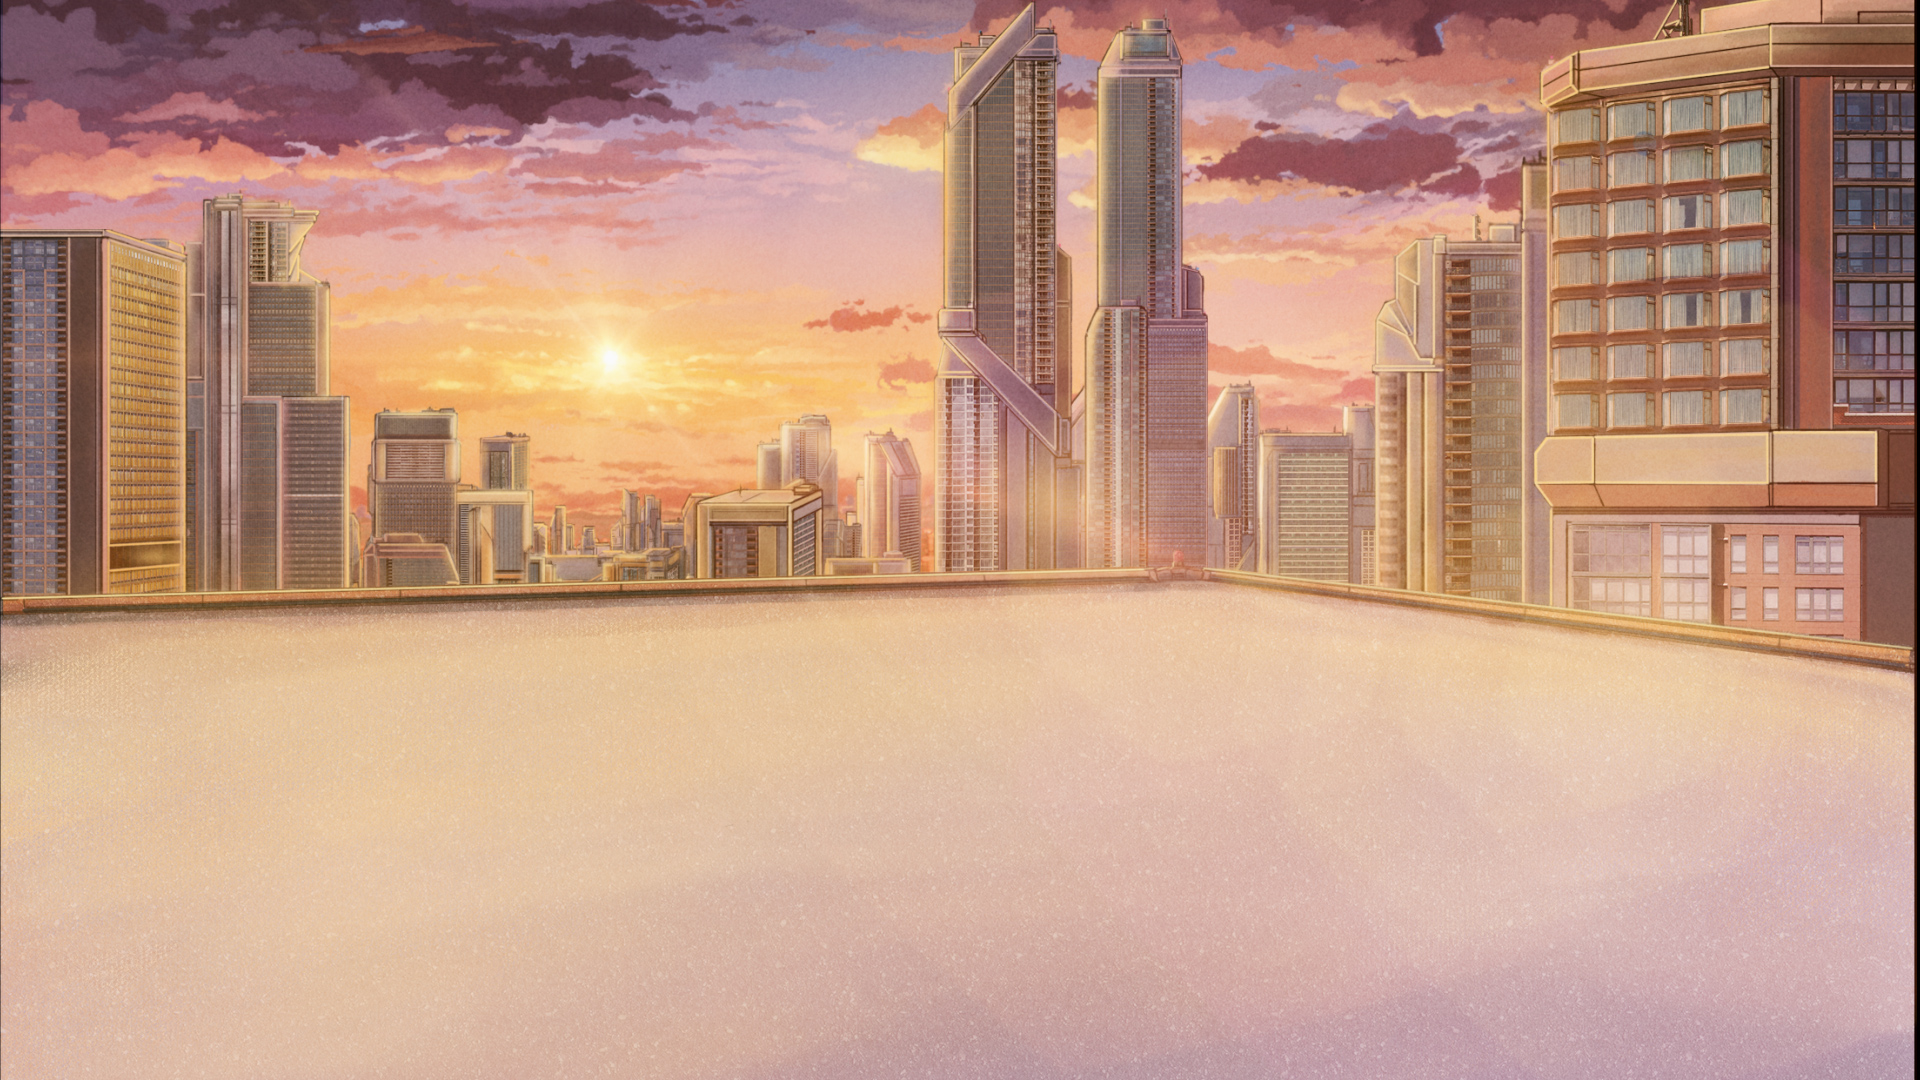 Anime 1920x1080 building digital art anime city city sunset glow sunset clouds sky anime cityscape rooftops outdoors alone